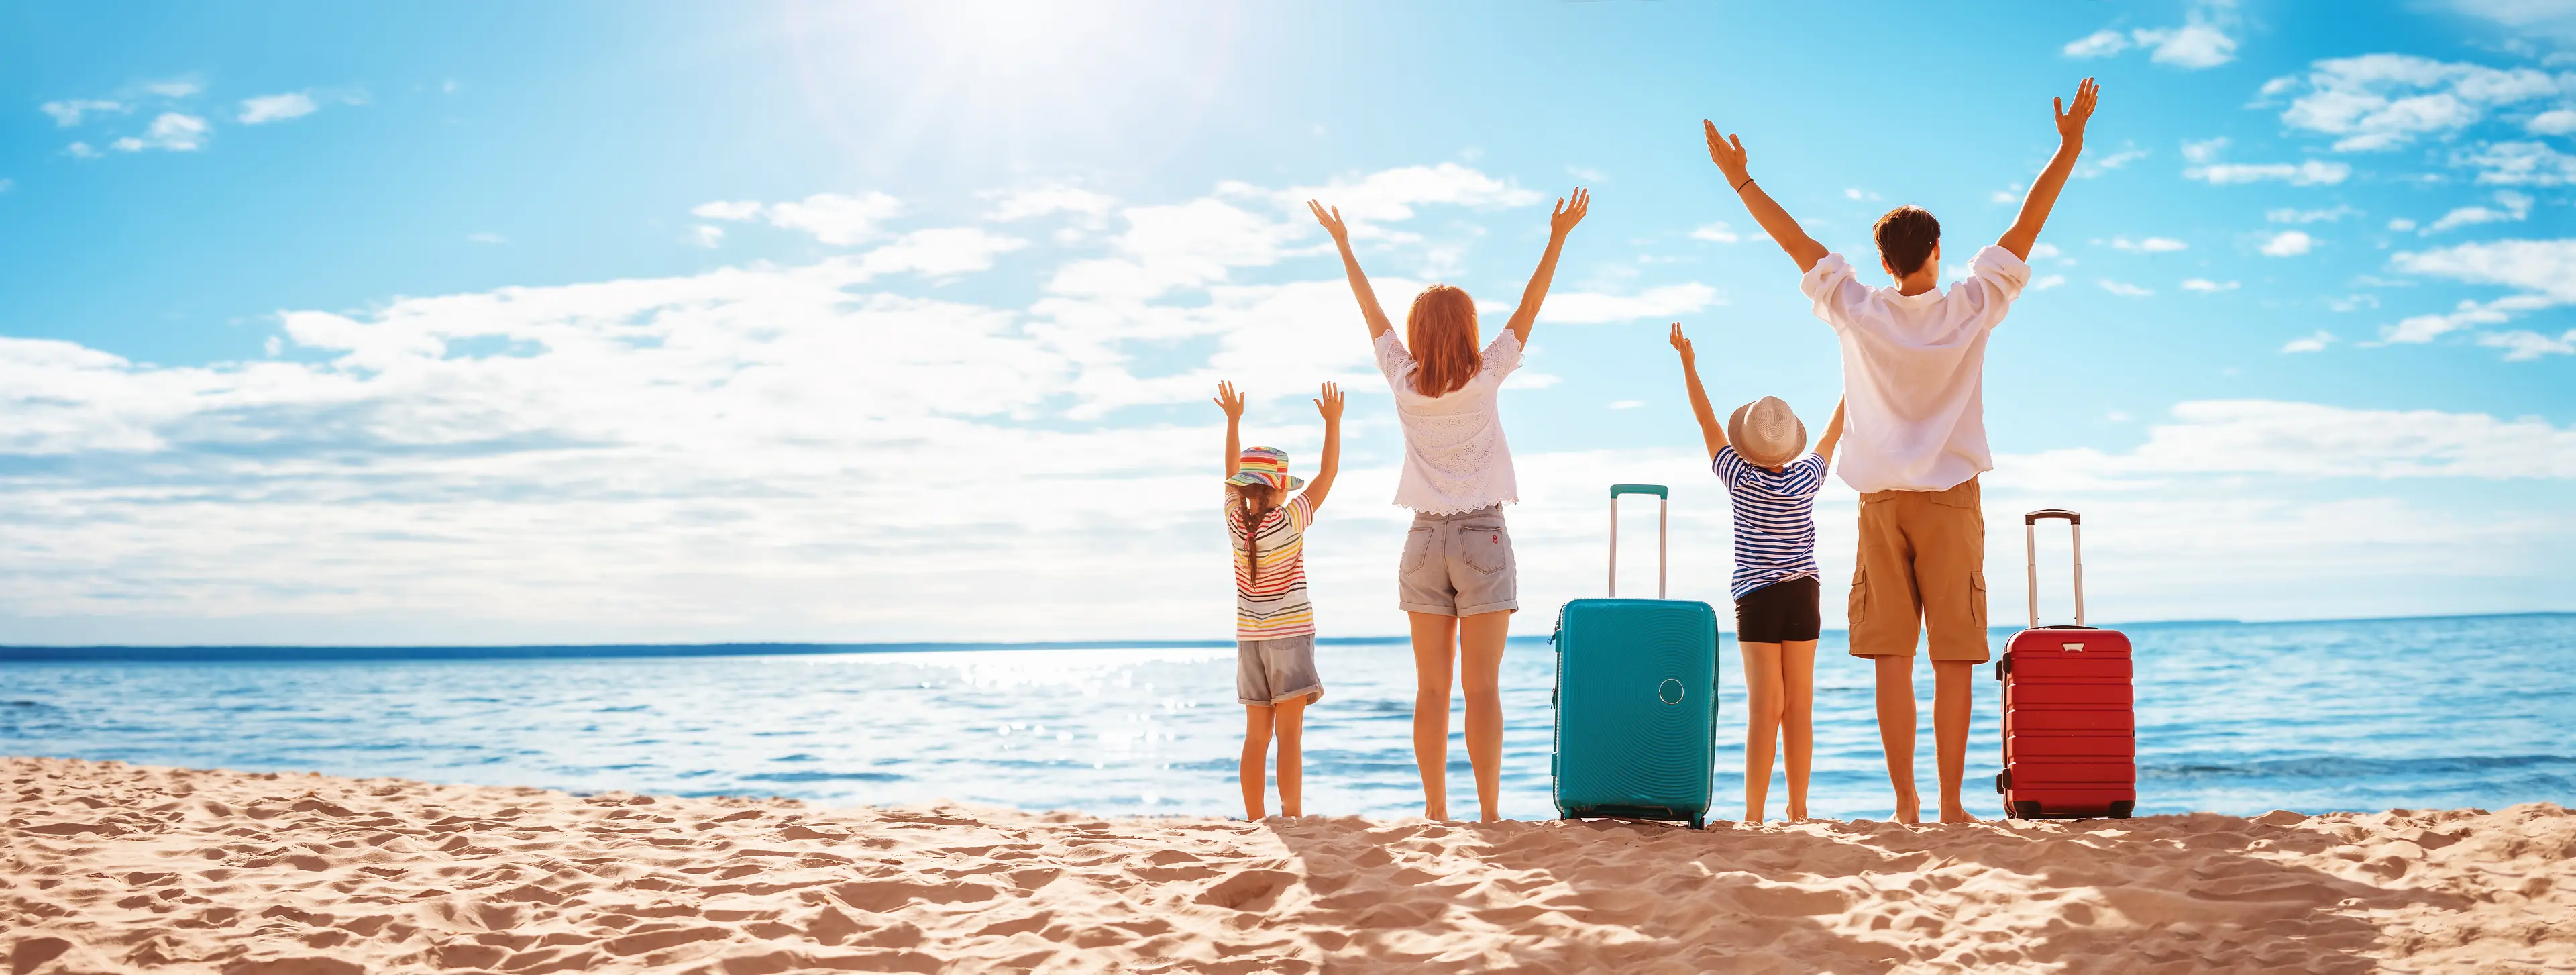 Mother and father with their children standing on the beach with suitcases. Concept of the family vacation and tourism.